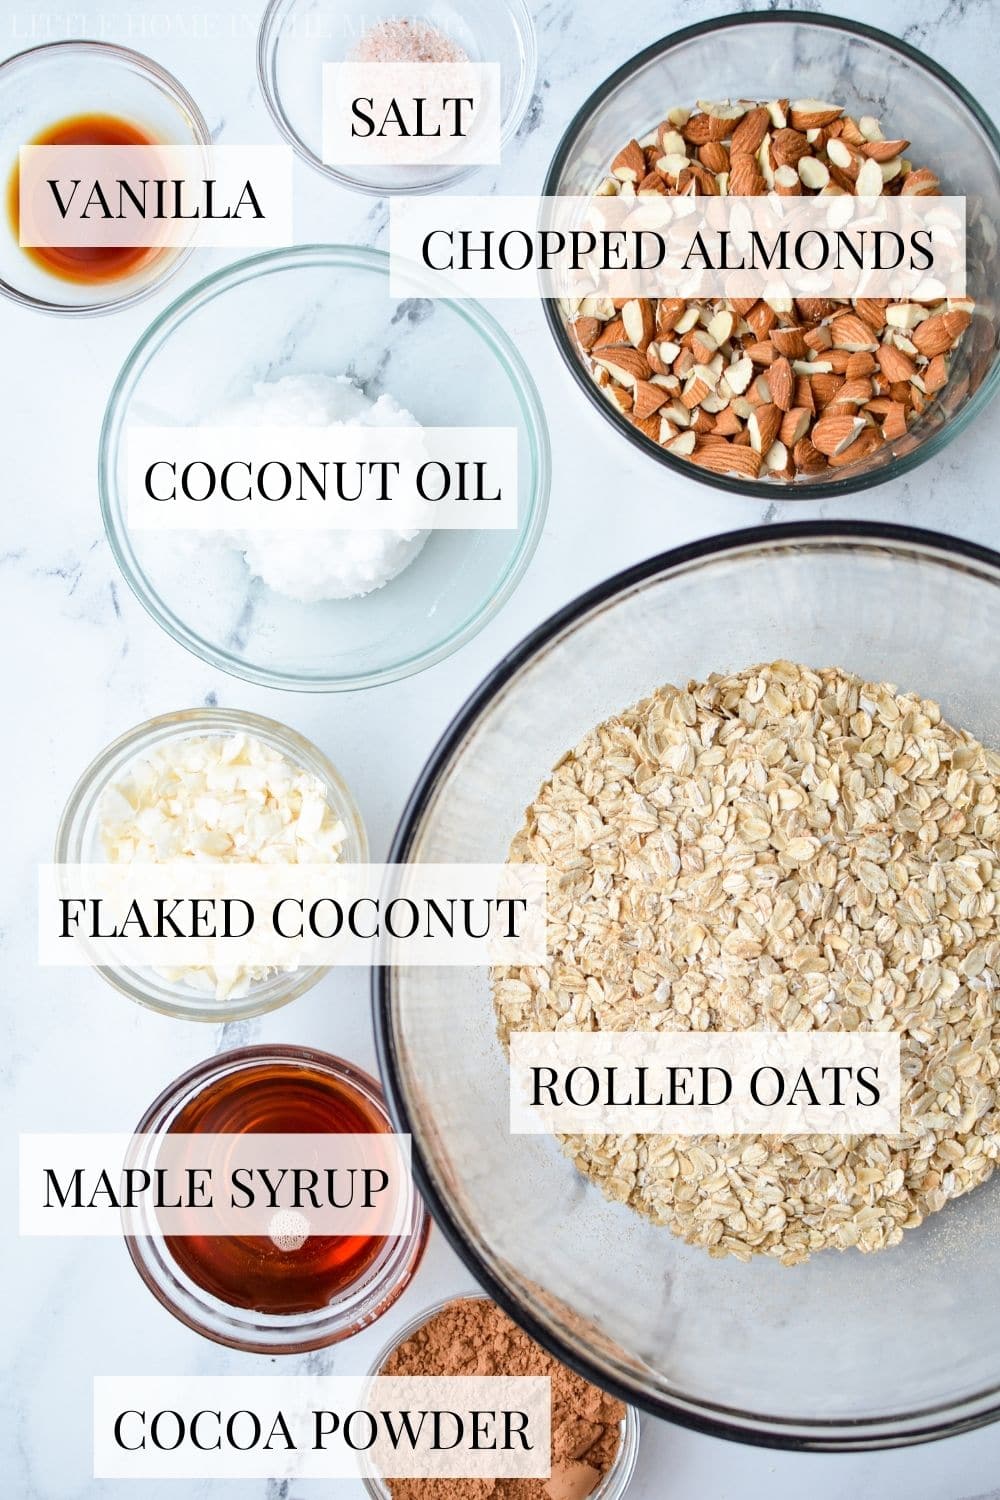 The ingredients needed to make chocolate almond granola